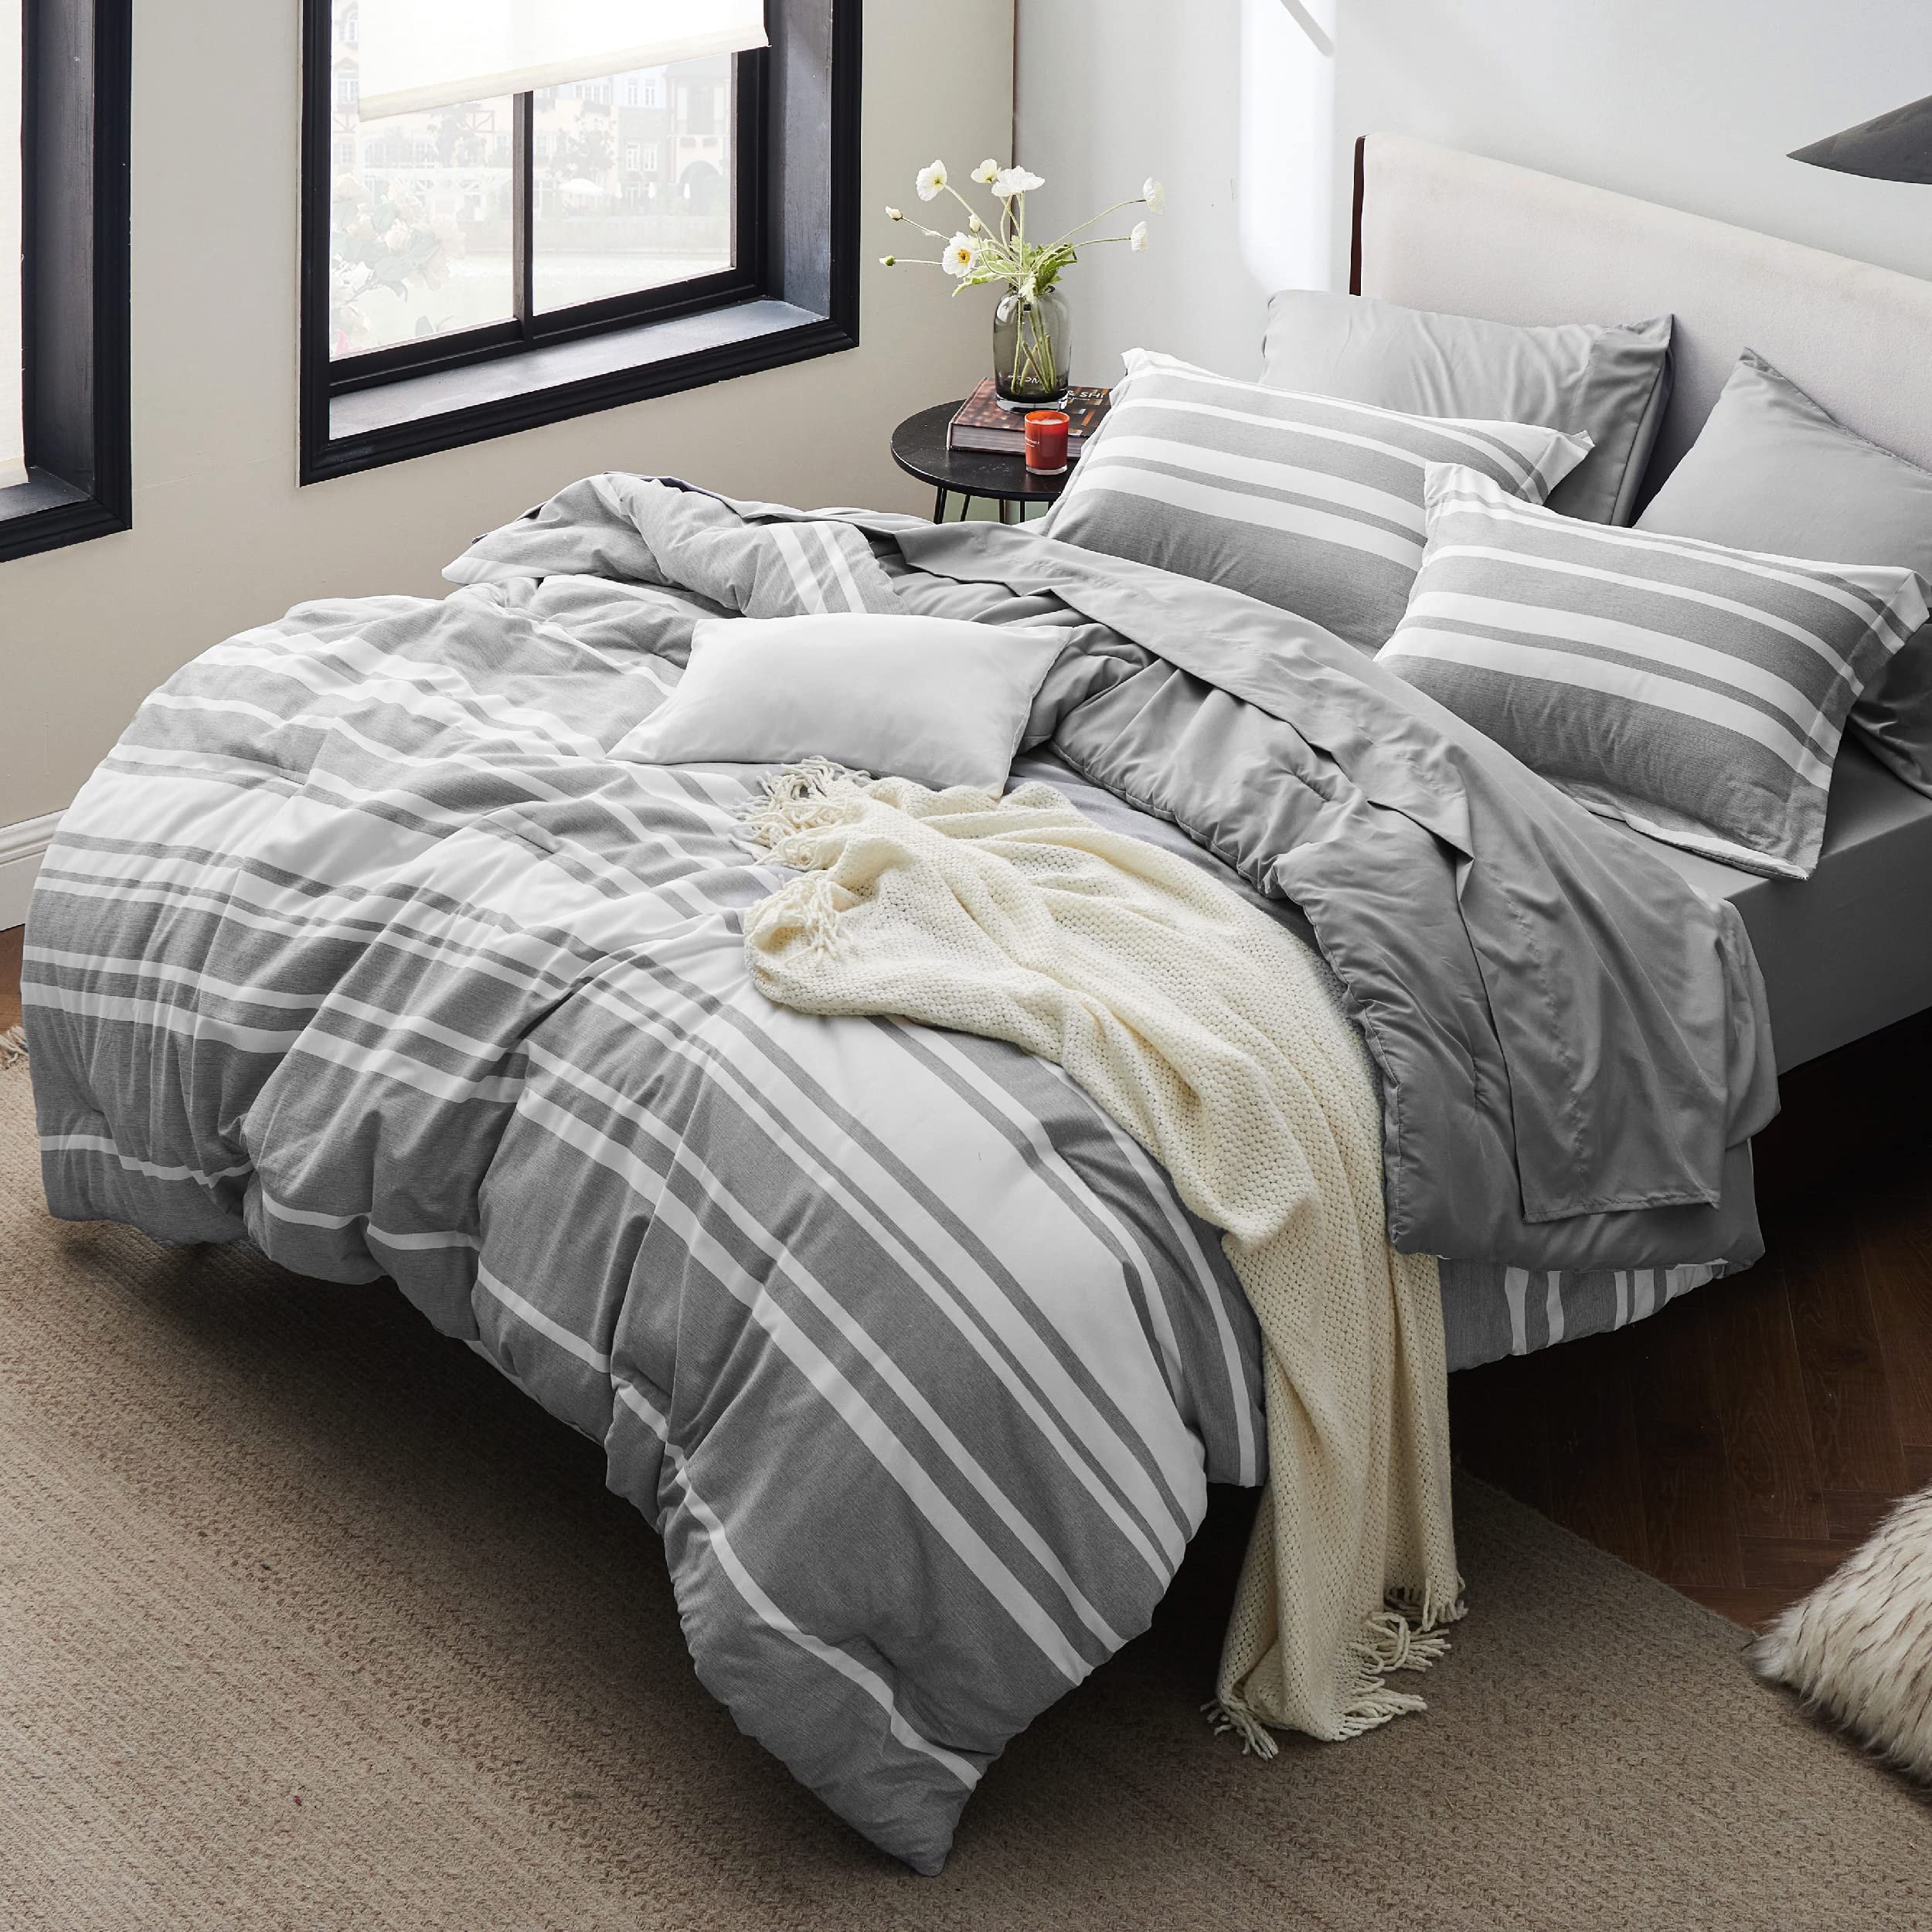 Bedsure Queen Comforter Set - 7 Pieces Comforters Queen Size Grey, Pintuck  Bedding Sets Queen for All Season, Bed in a Bag with Flat Sheet and Fitted